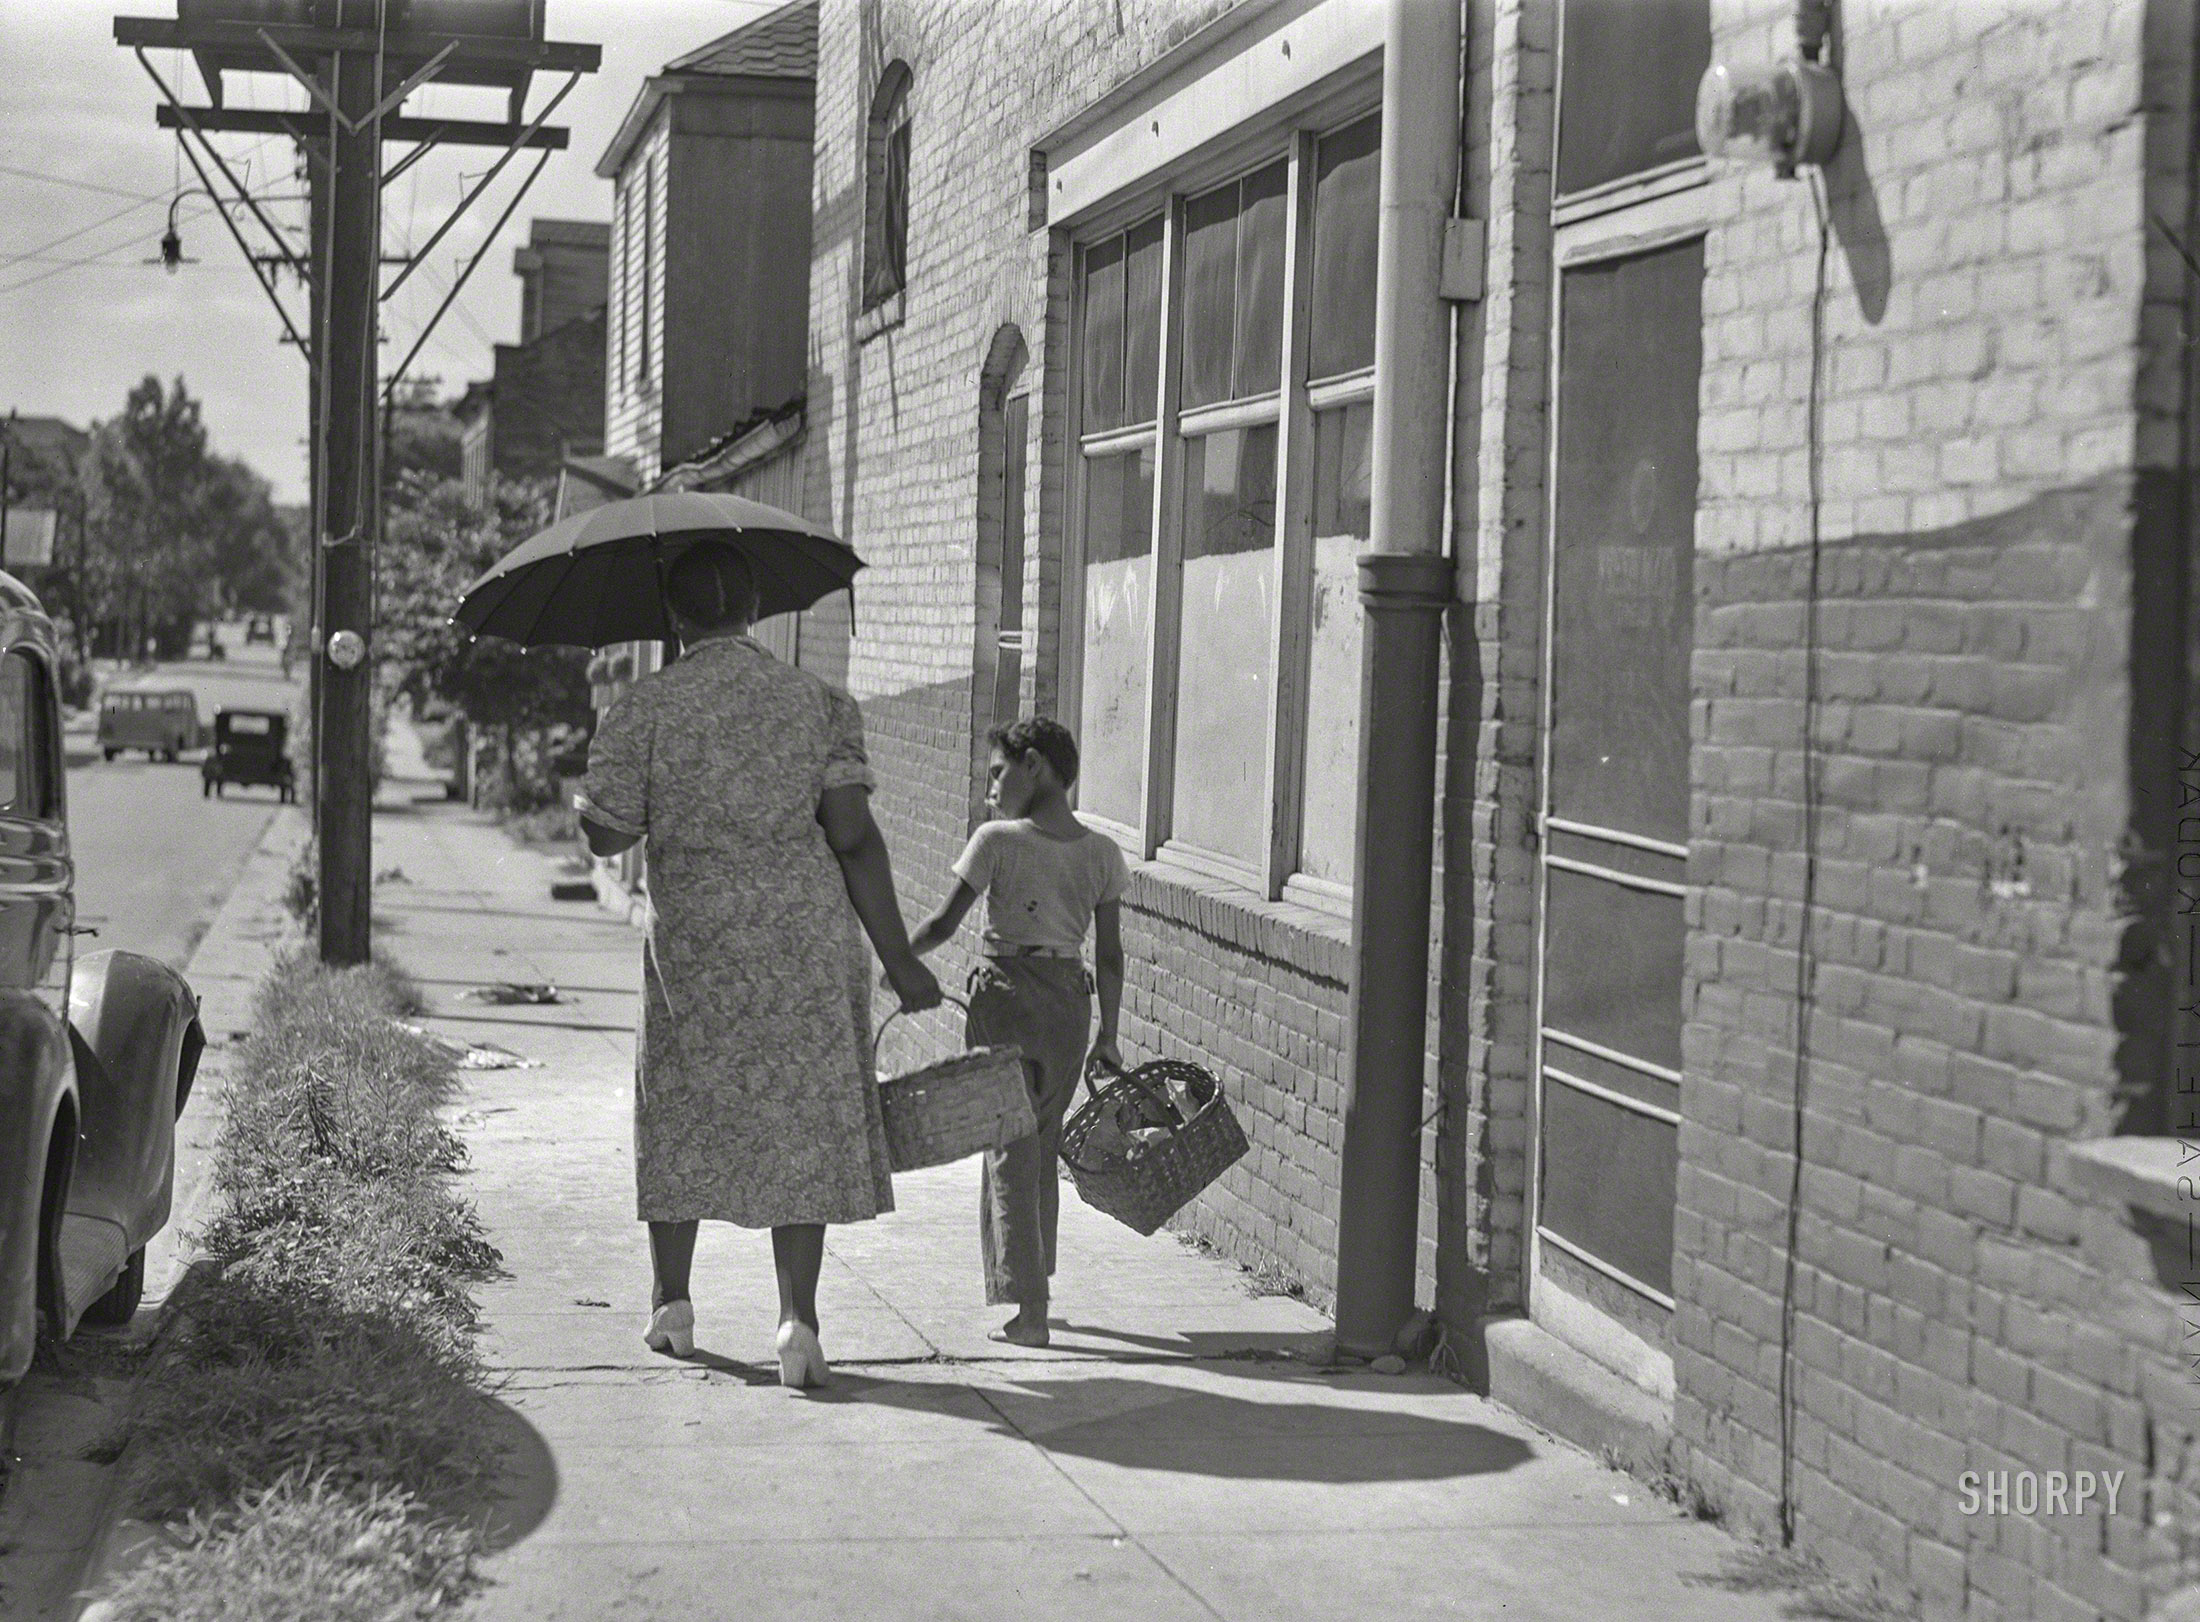 August 1940. "Street scene in Natchez, Mississippi." The duo last seen here. Medium format negative by Marion Post Wolcott for the Farm Security Administration. View full size.